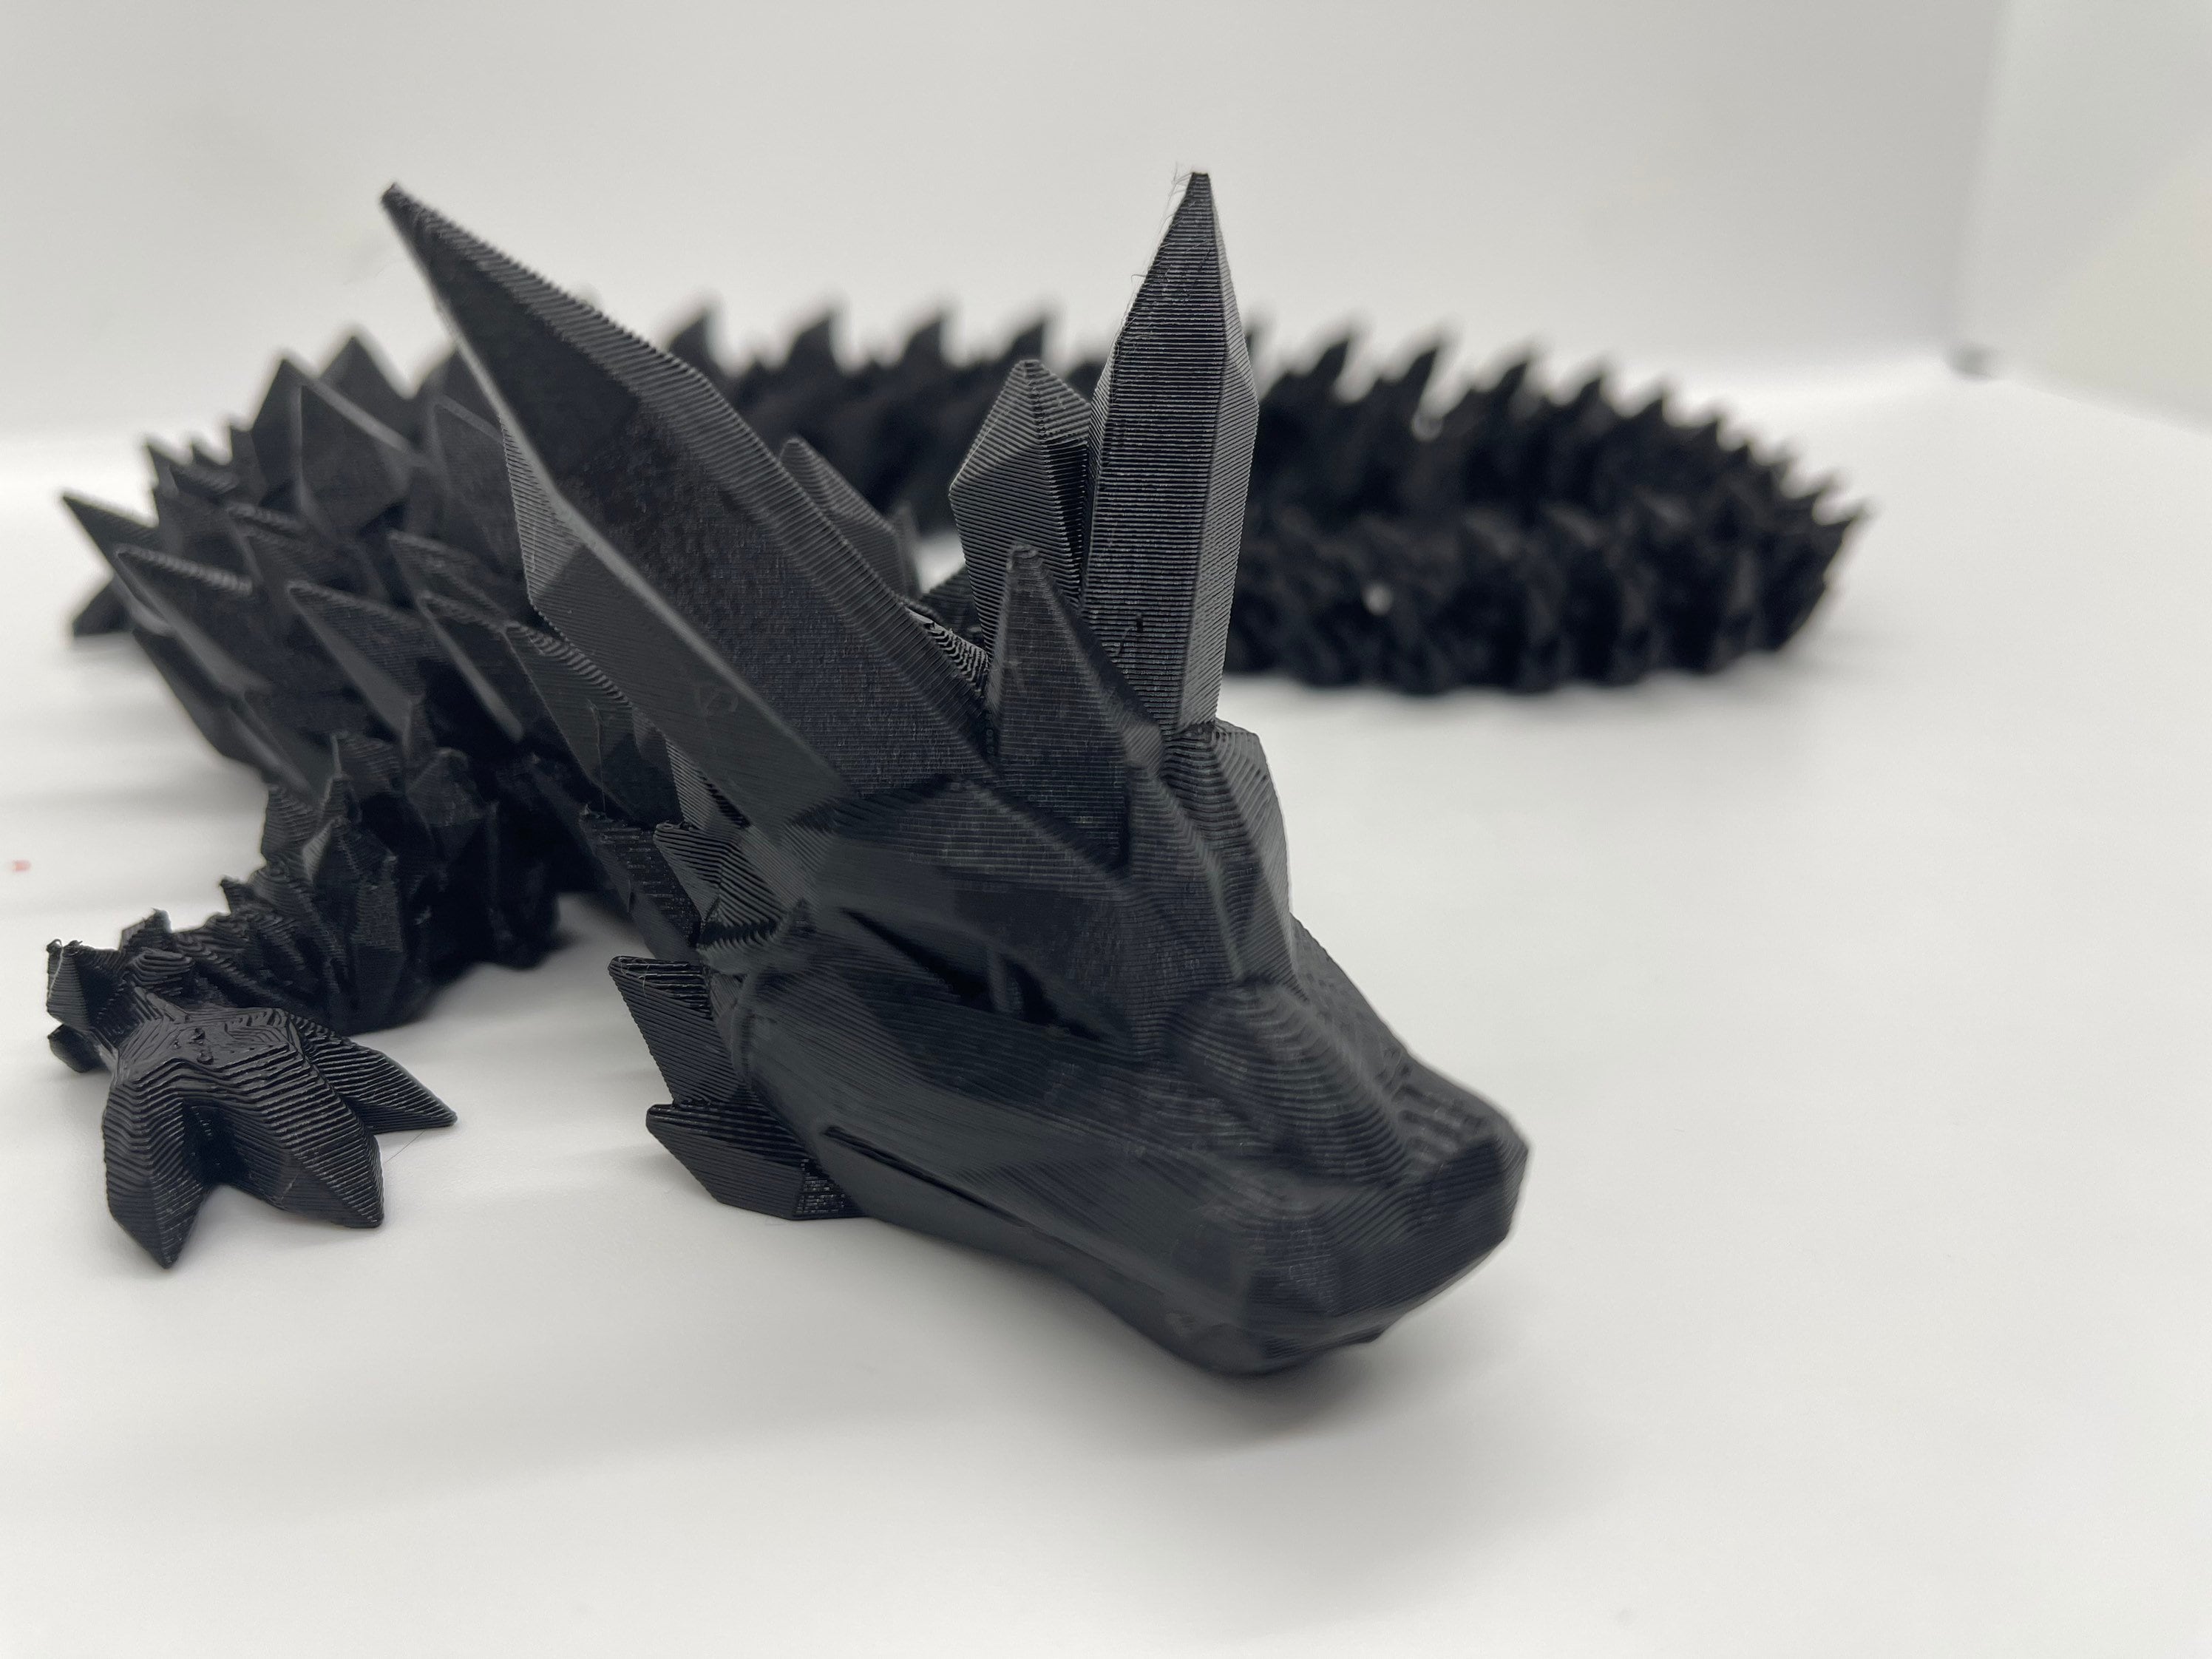 Two Color 3D Printed Dragon, Personalized Color, 24 Inch, by